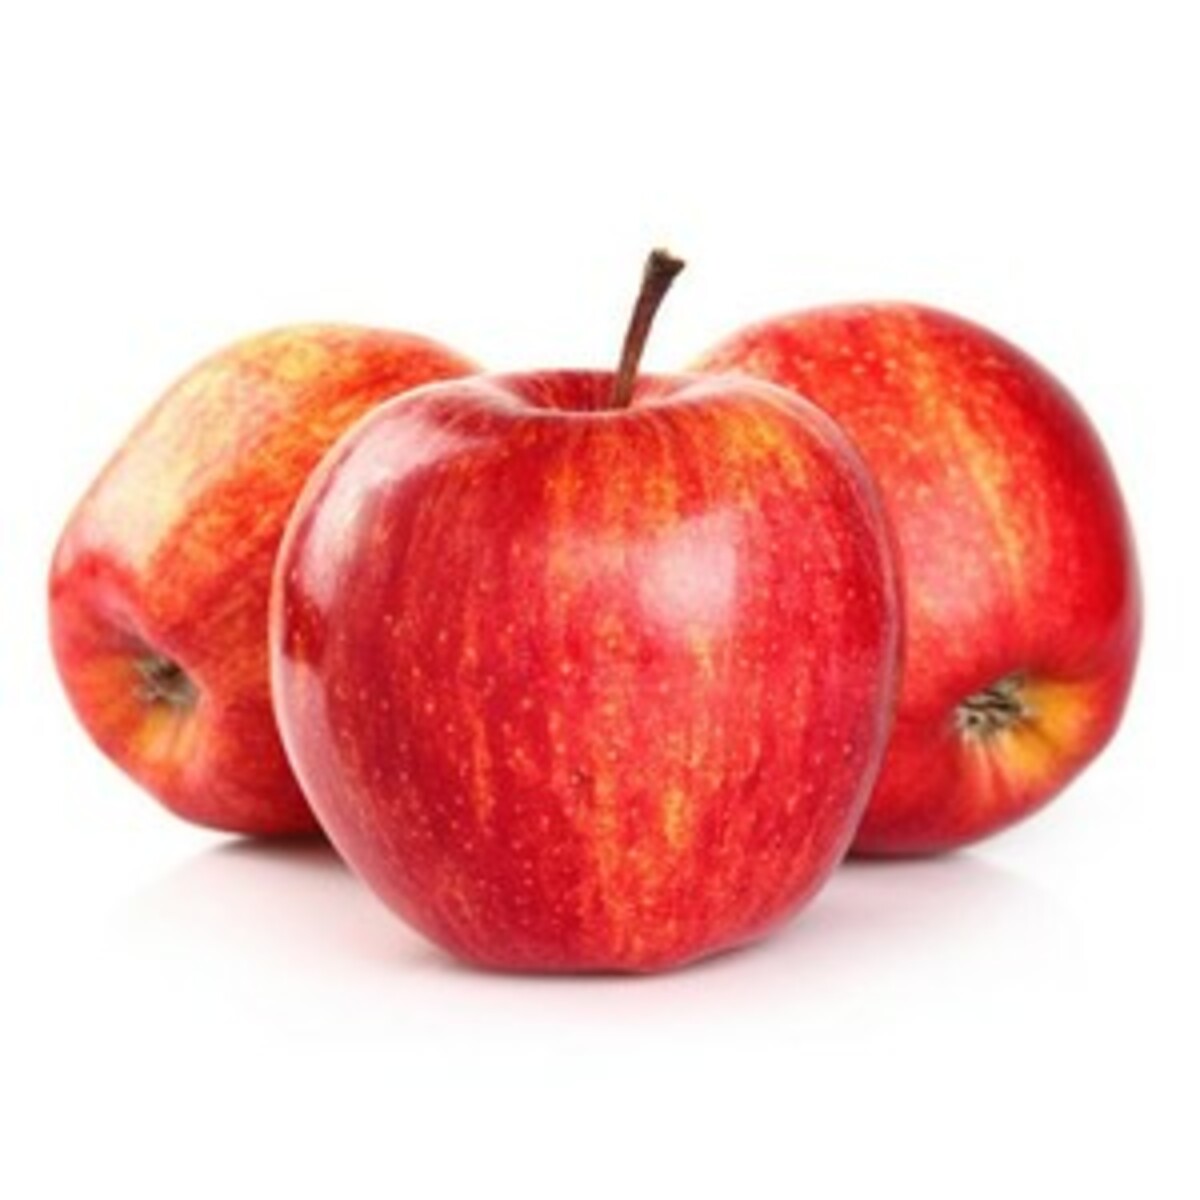 Apple Royal Gala South Africa 500g Approx Weight